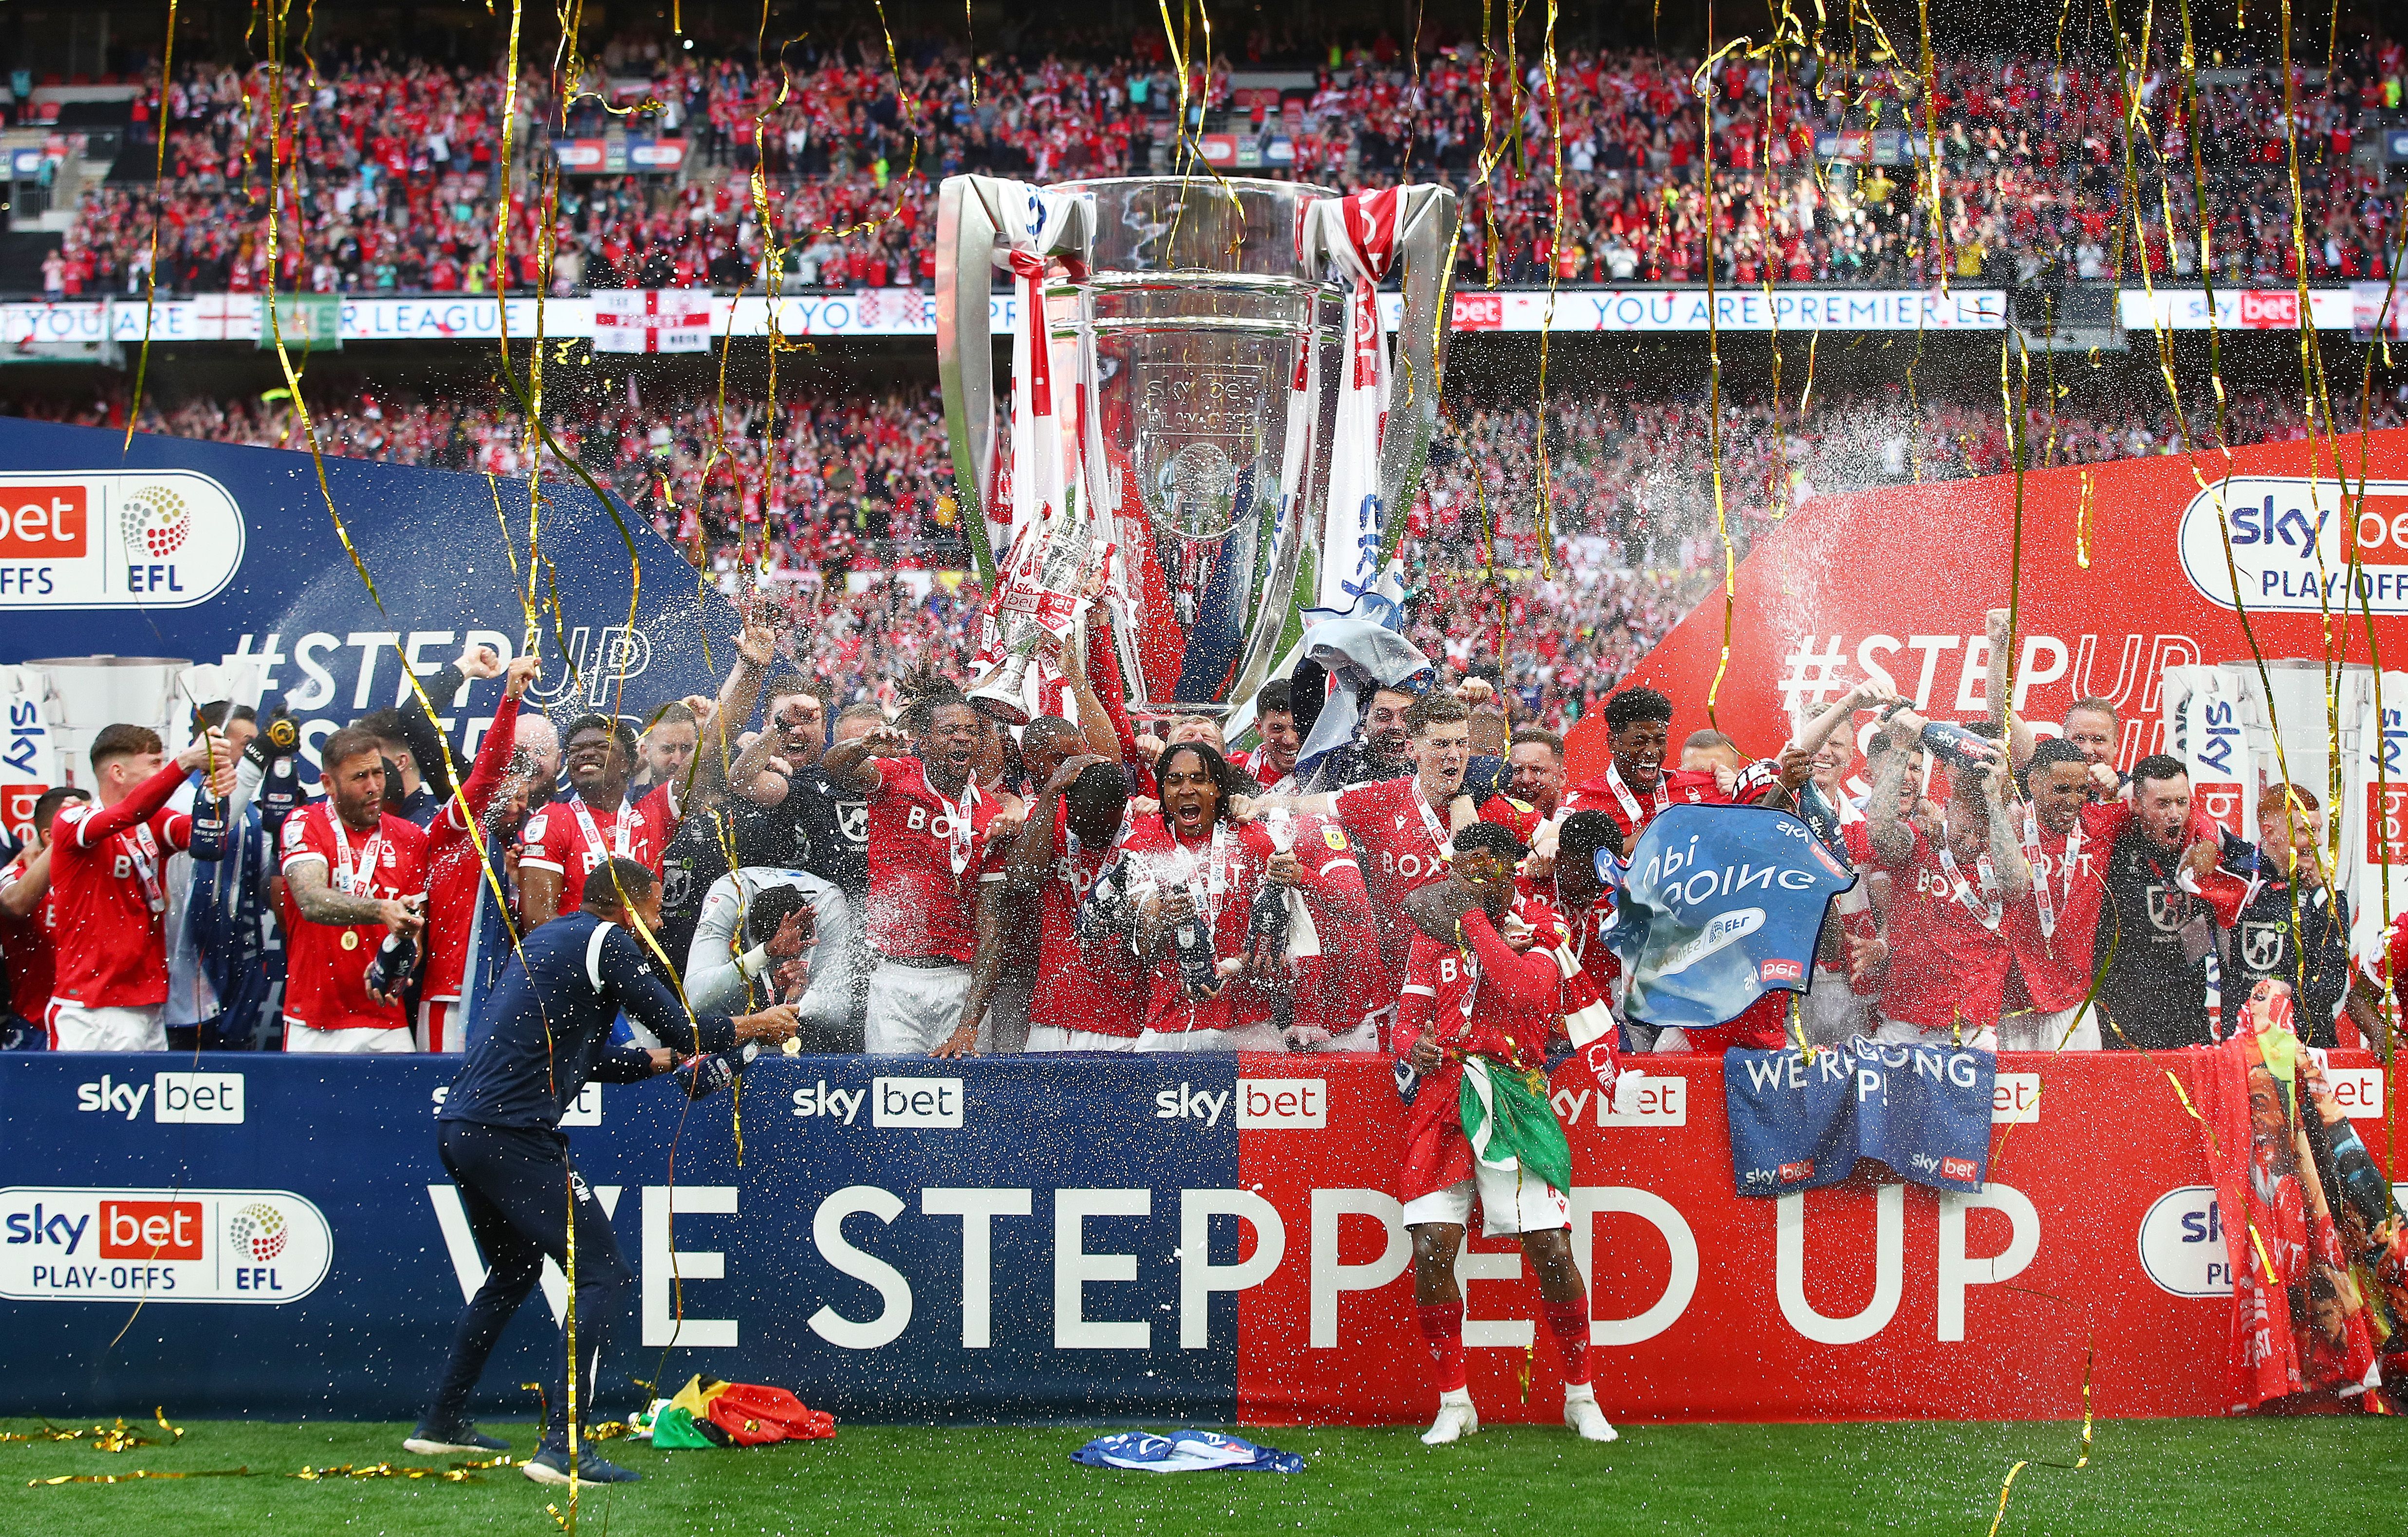 ewis Grabban of Nottingham forest lifts the trophy following their team's victory in the Sky Bet Championship Play-Off Final match between Huddersfield Town and Nottingham Forest at Wembley Stadium on May 29, 2022 in London, England